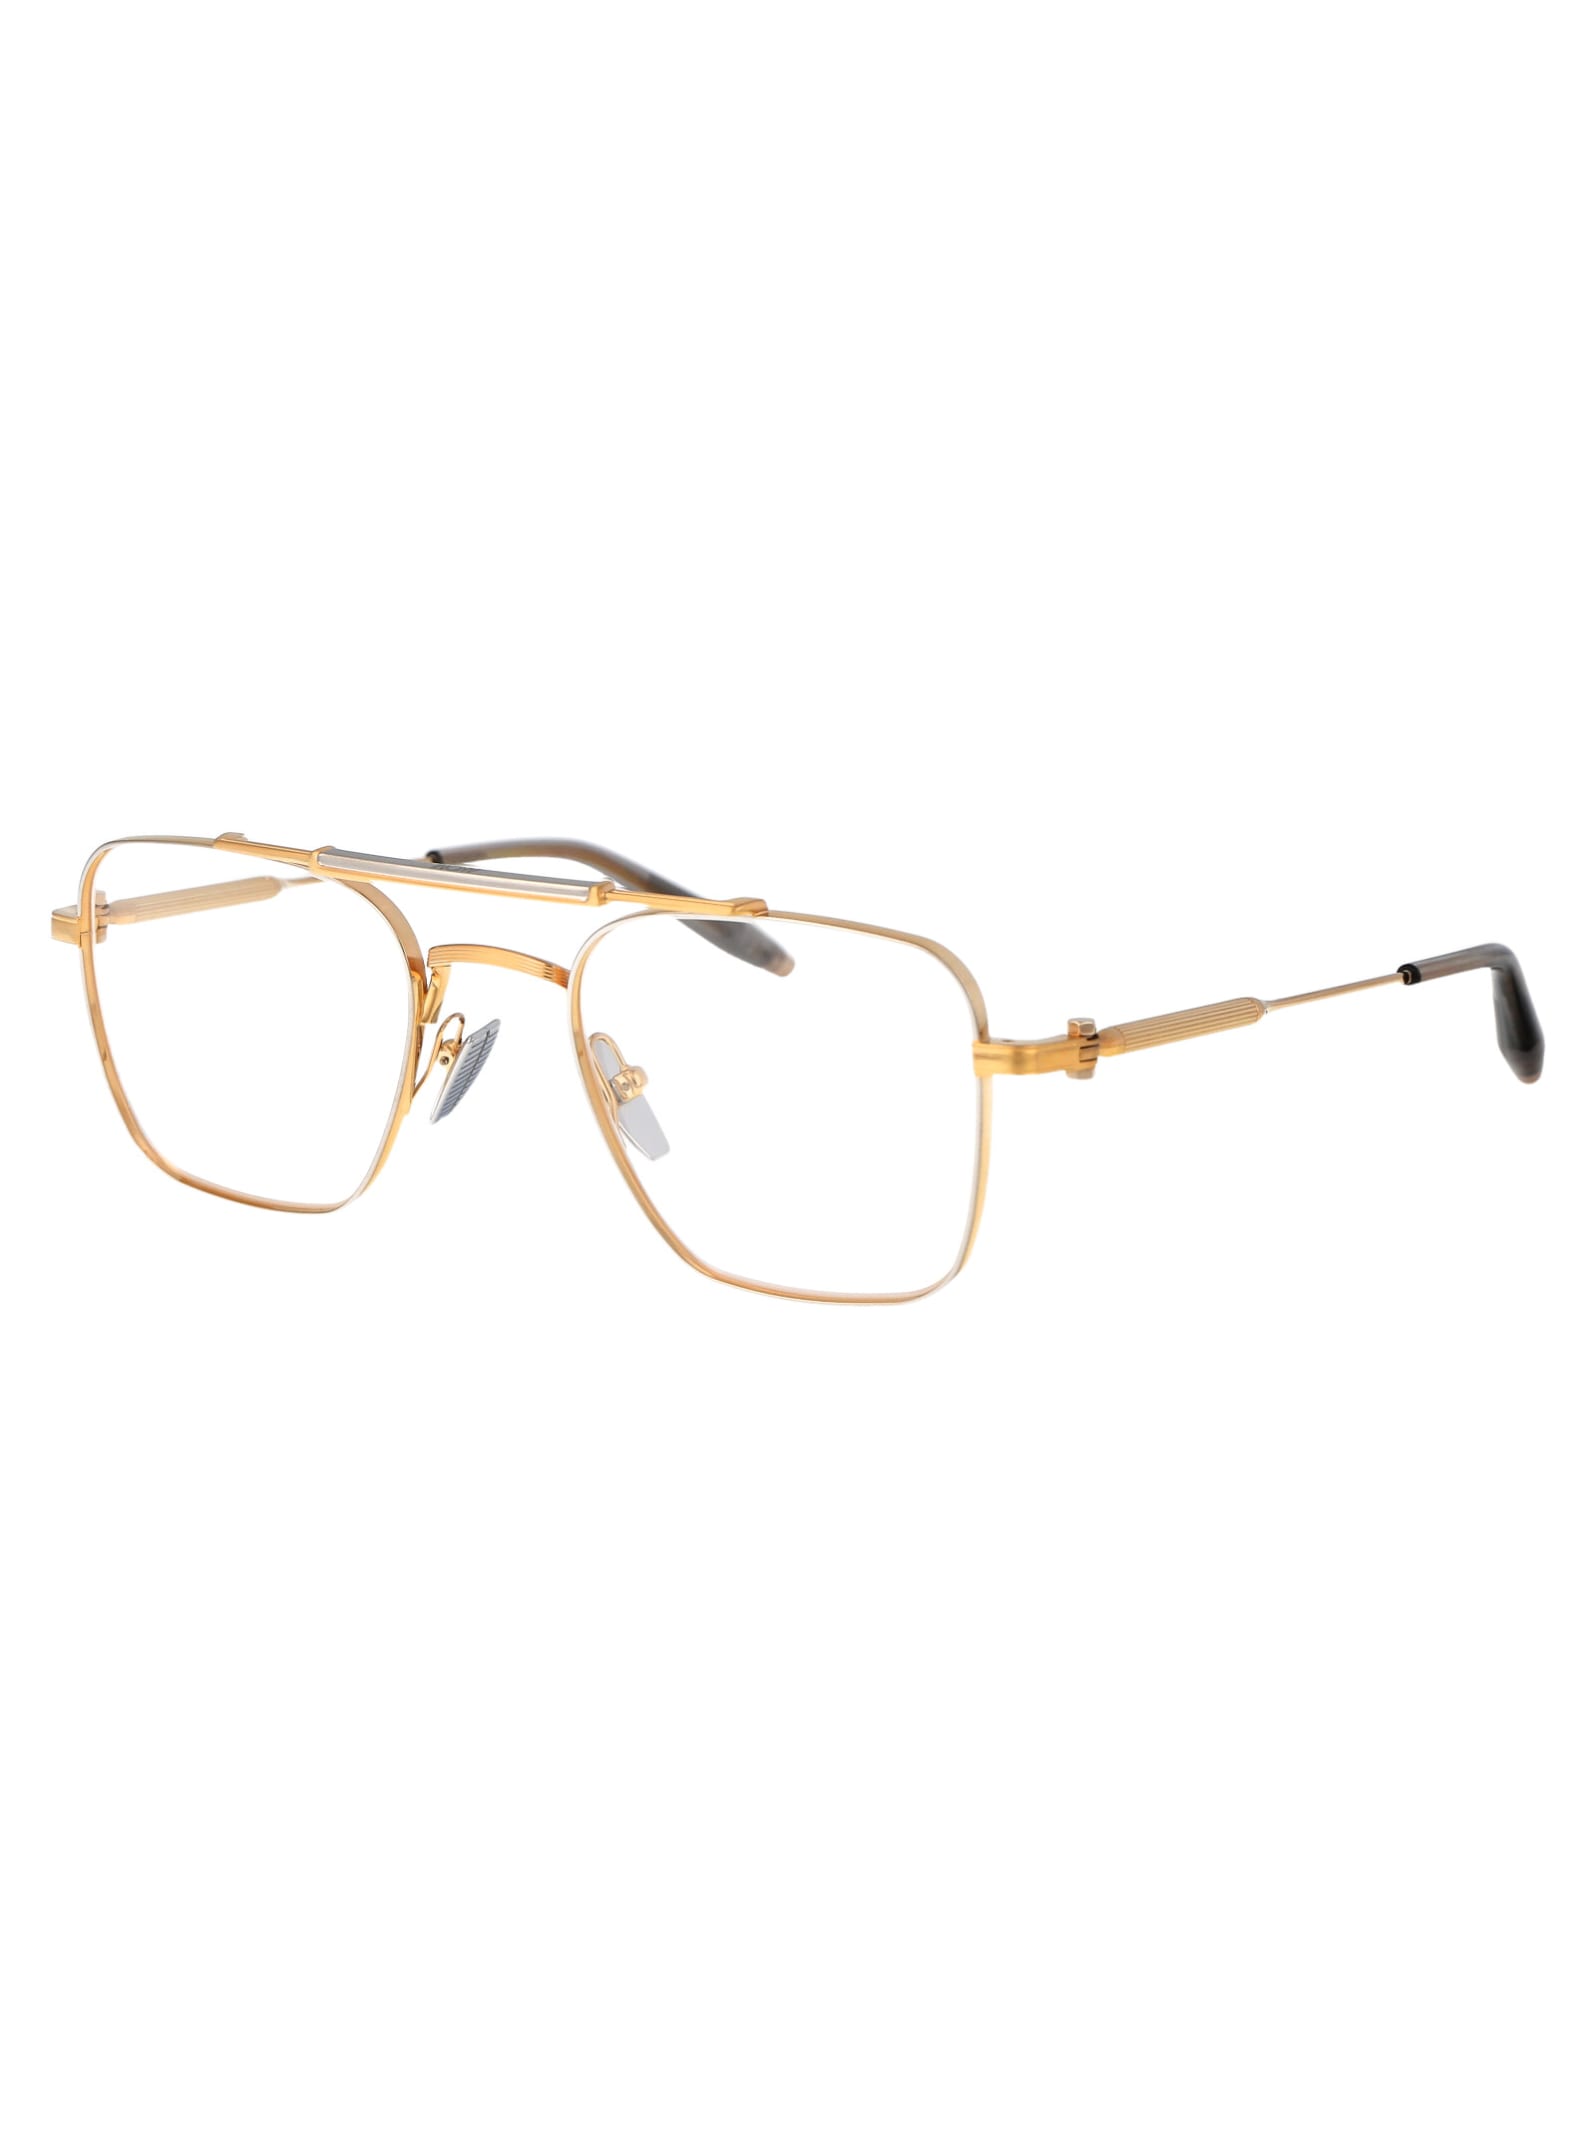 Shop Akoni Europa Glasses In Brushed Gold And Silver- Grey Crystal